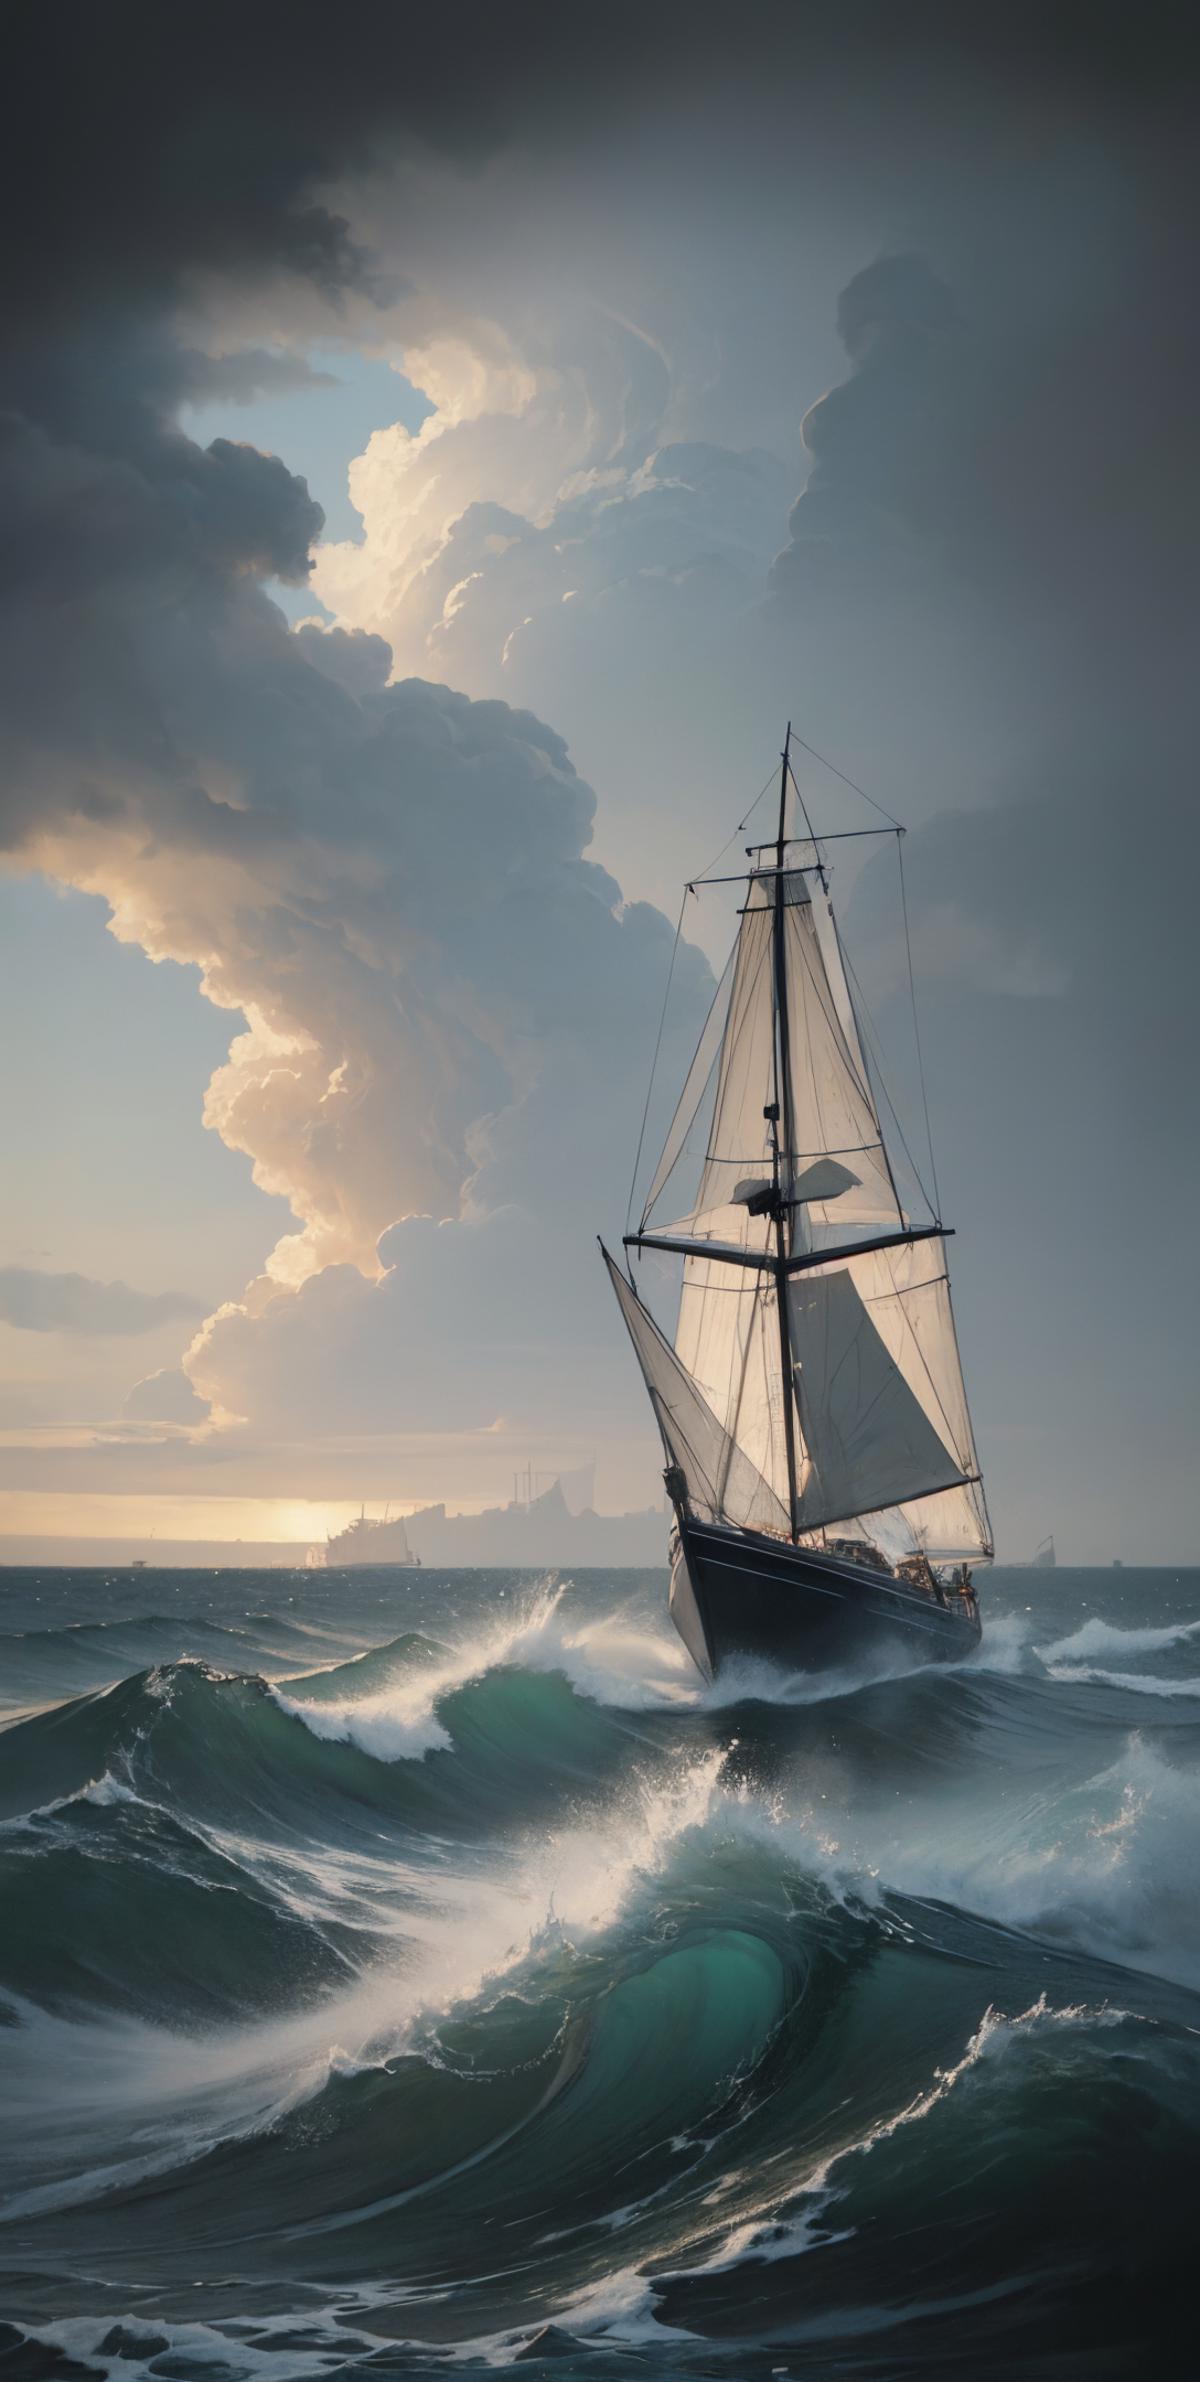 A large sailing ship in the middle of a stormy sea.